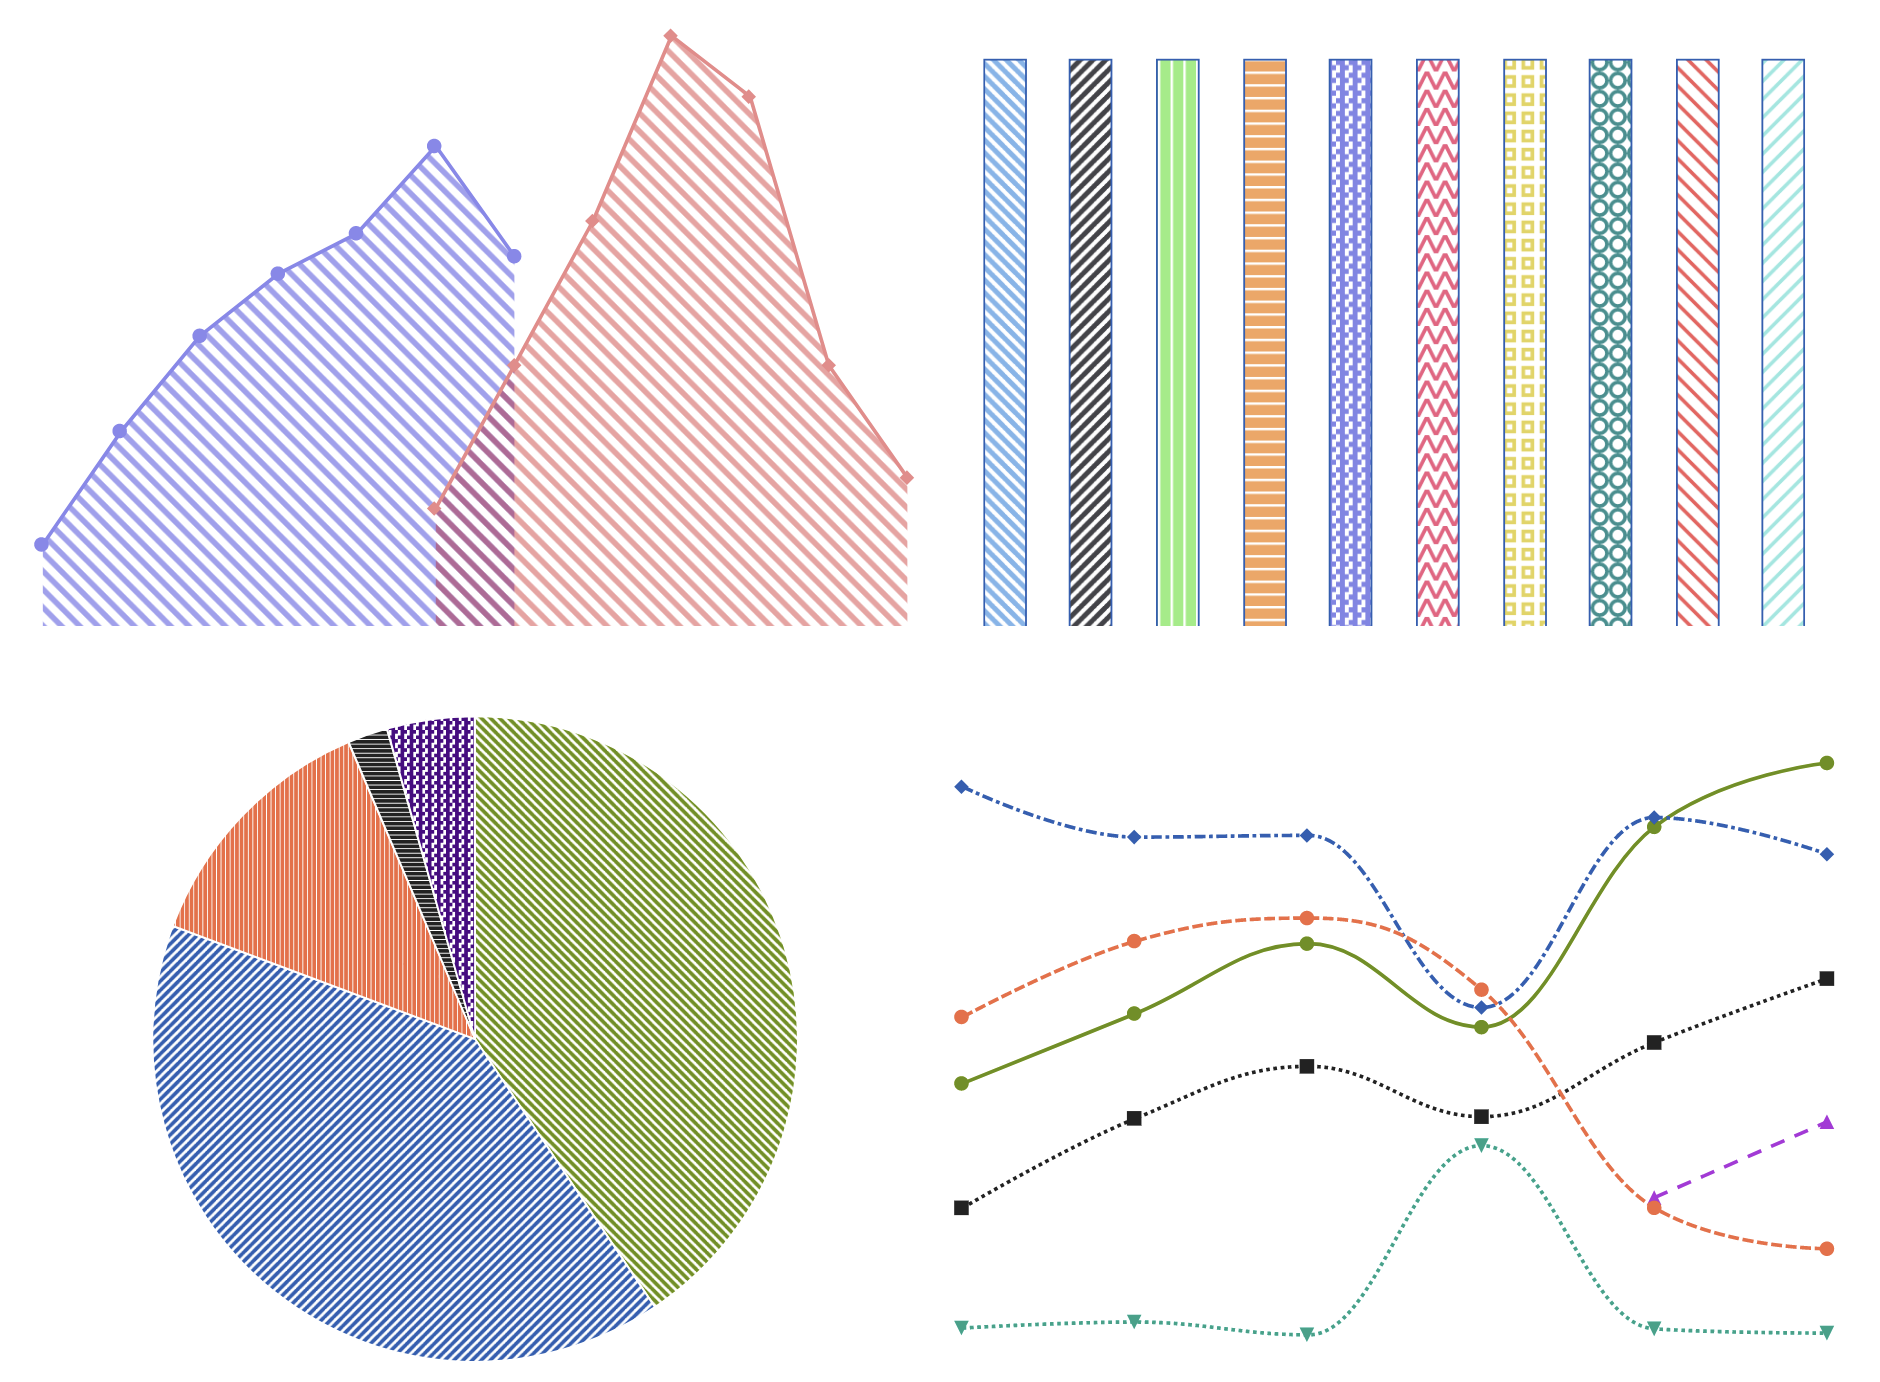 Examples of Highchart visualisations with pattern fills with different colours, applying the concept of double encoding